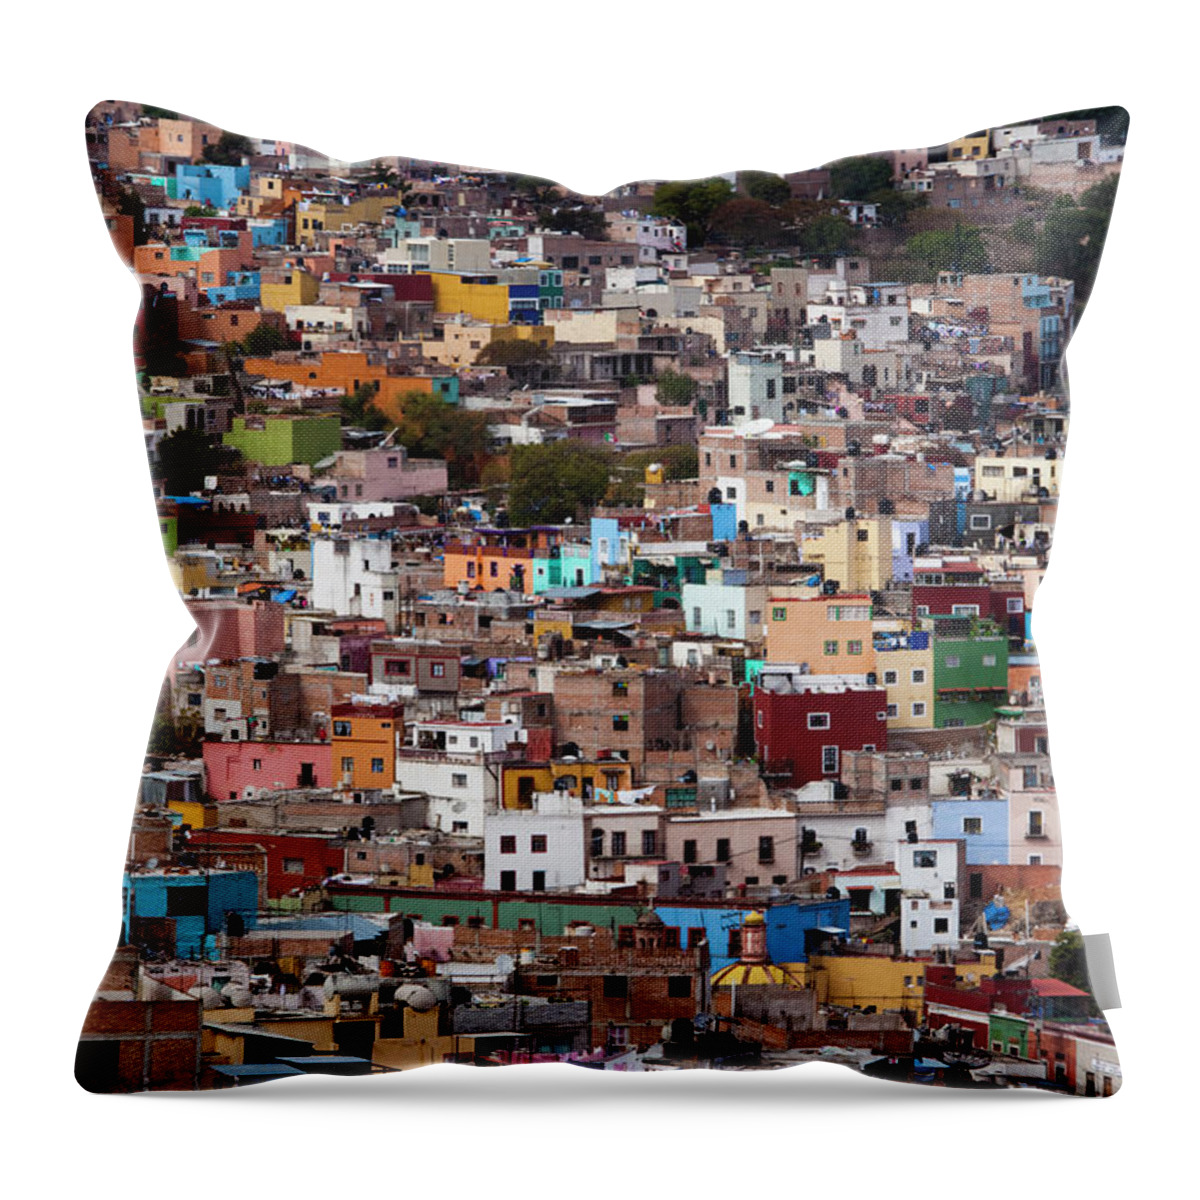 Built Structure Throw Pillow featuring the photograph A Hillside Of Colorful Buildings, In by Mint Images - Art Wolfe